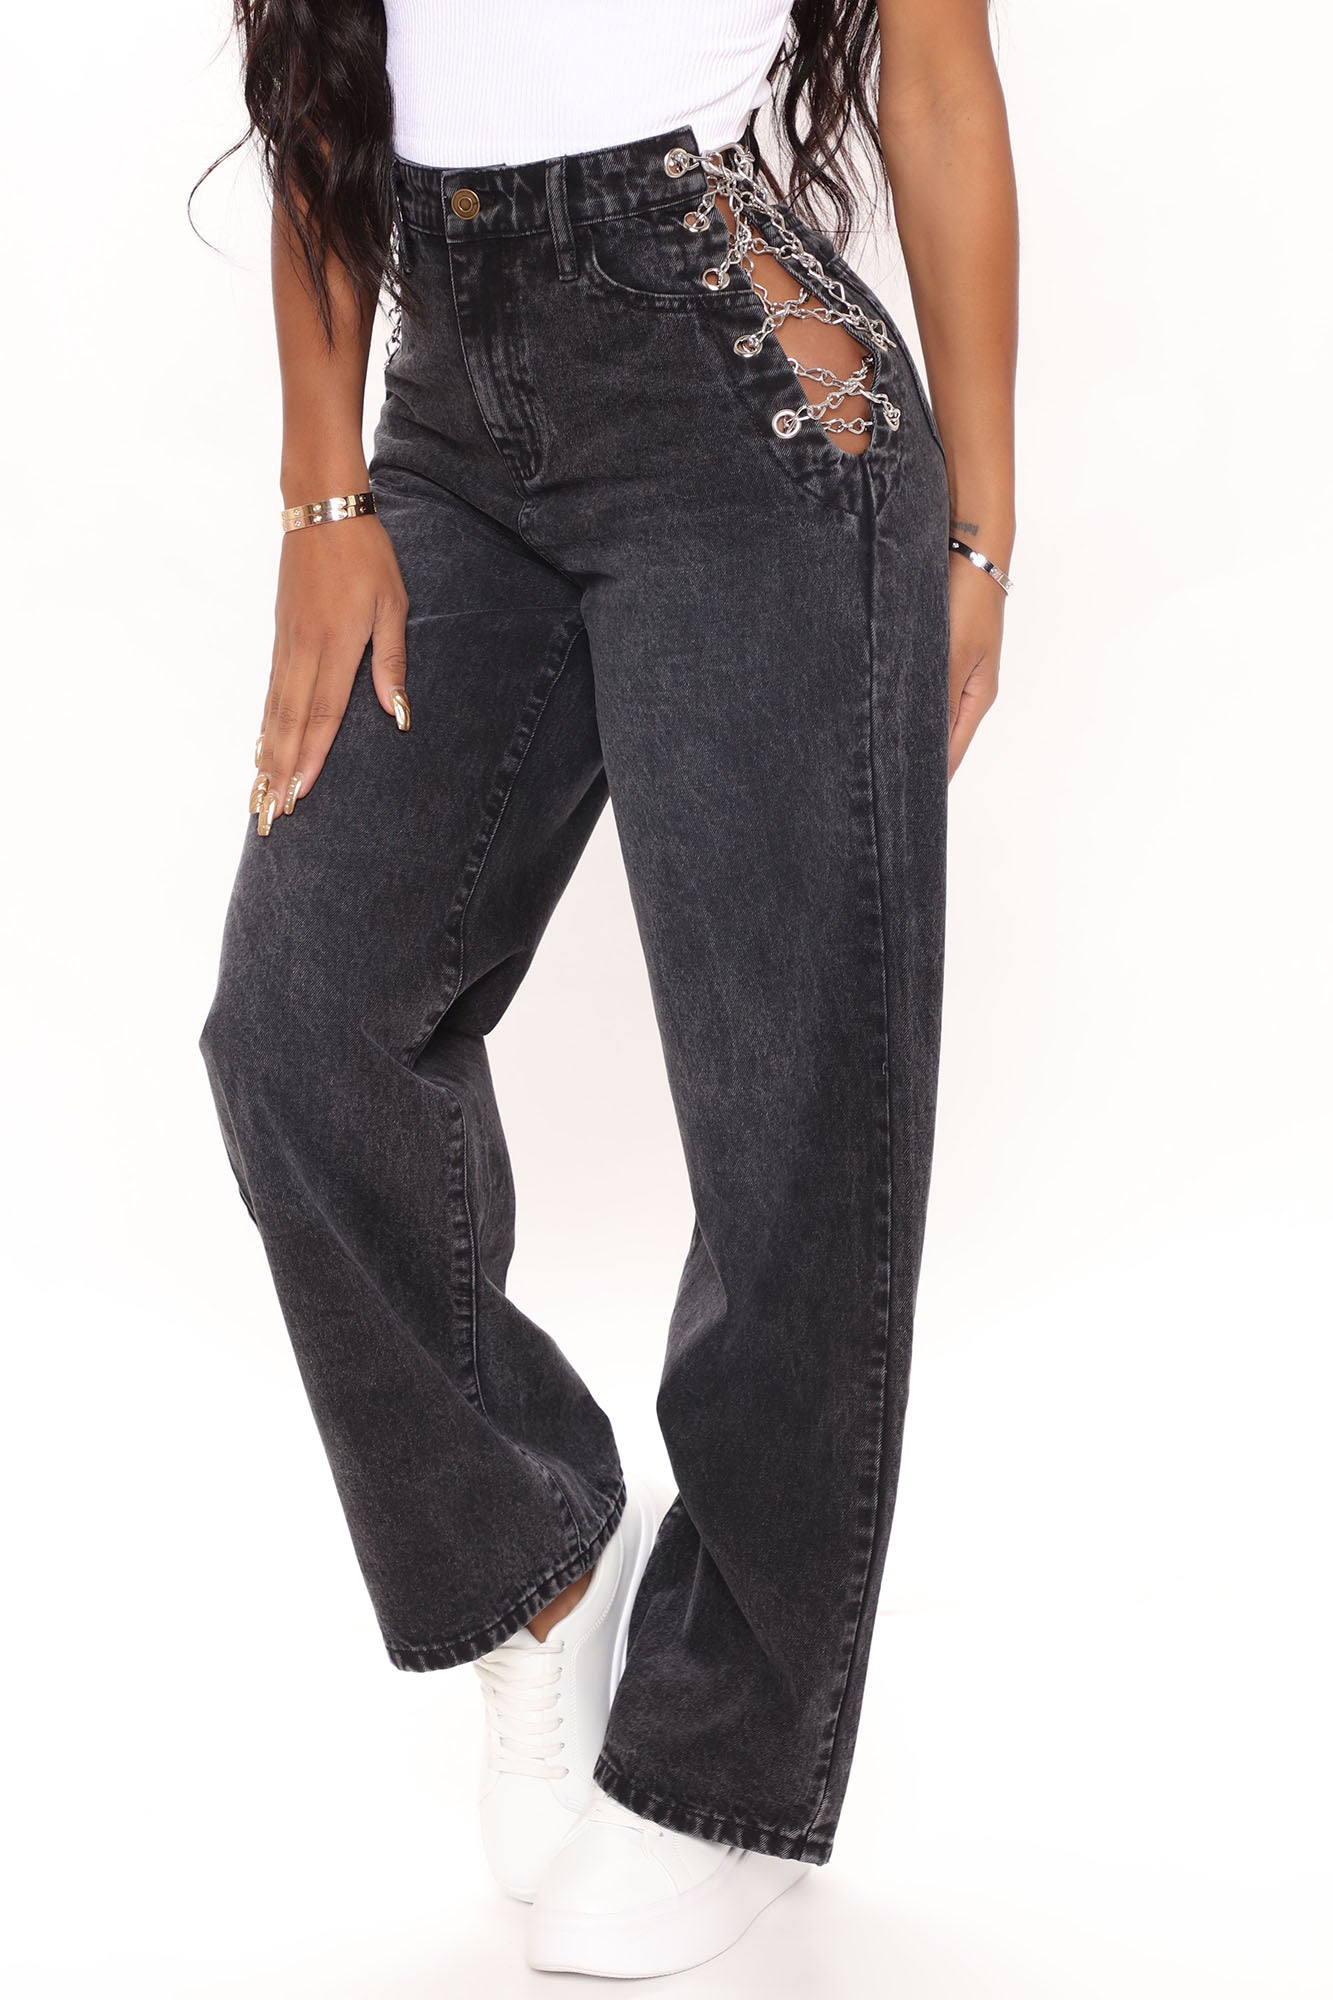 Chain Link Jeans 